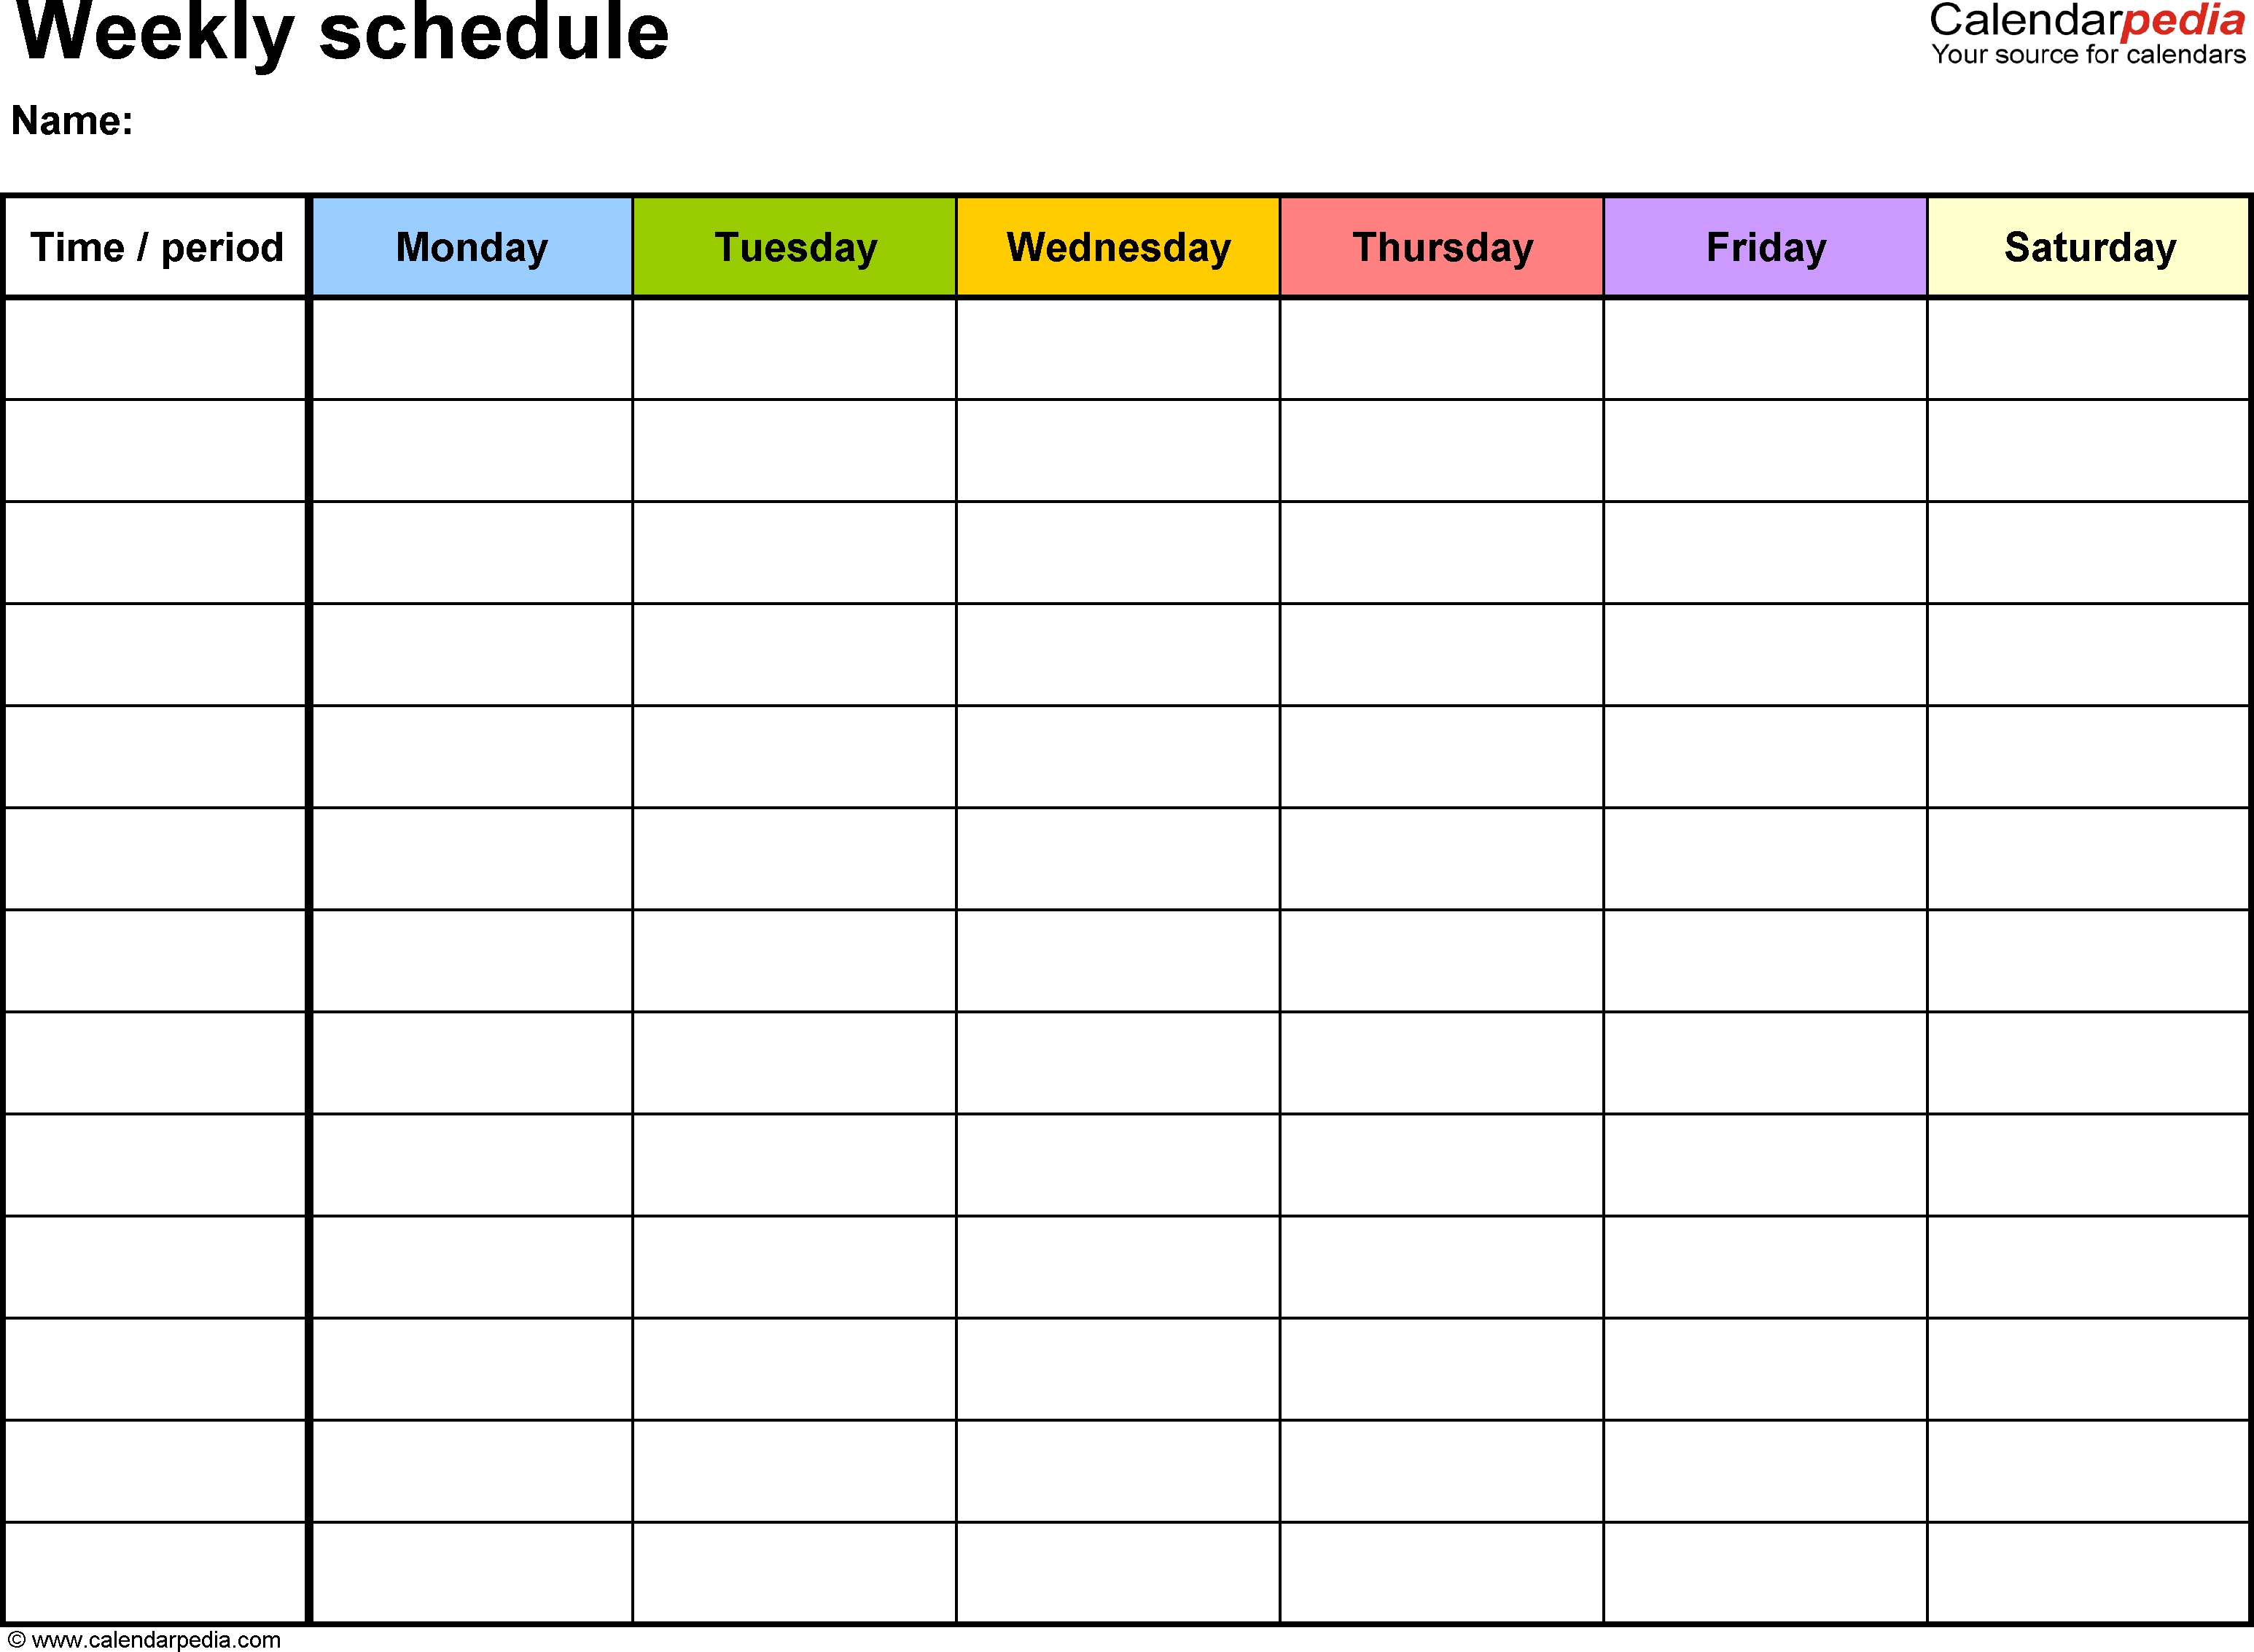 Free Weekly Schedule Templates For Word - 18 Templates-Template For Monday To Friday